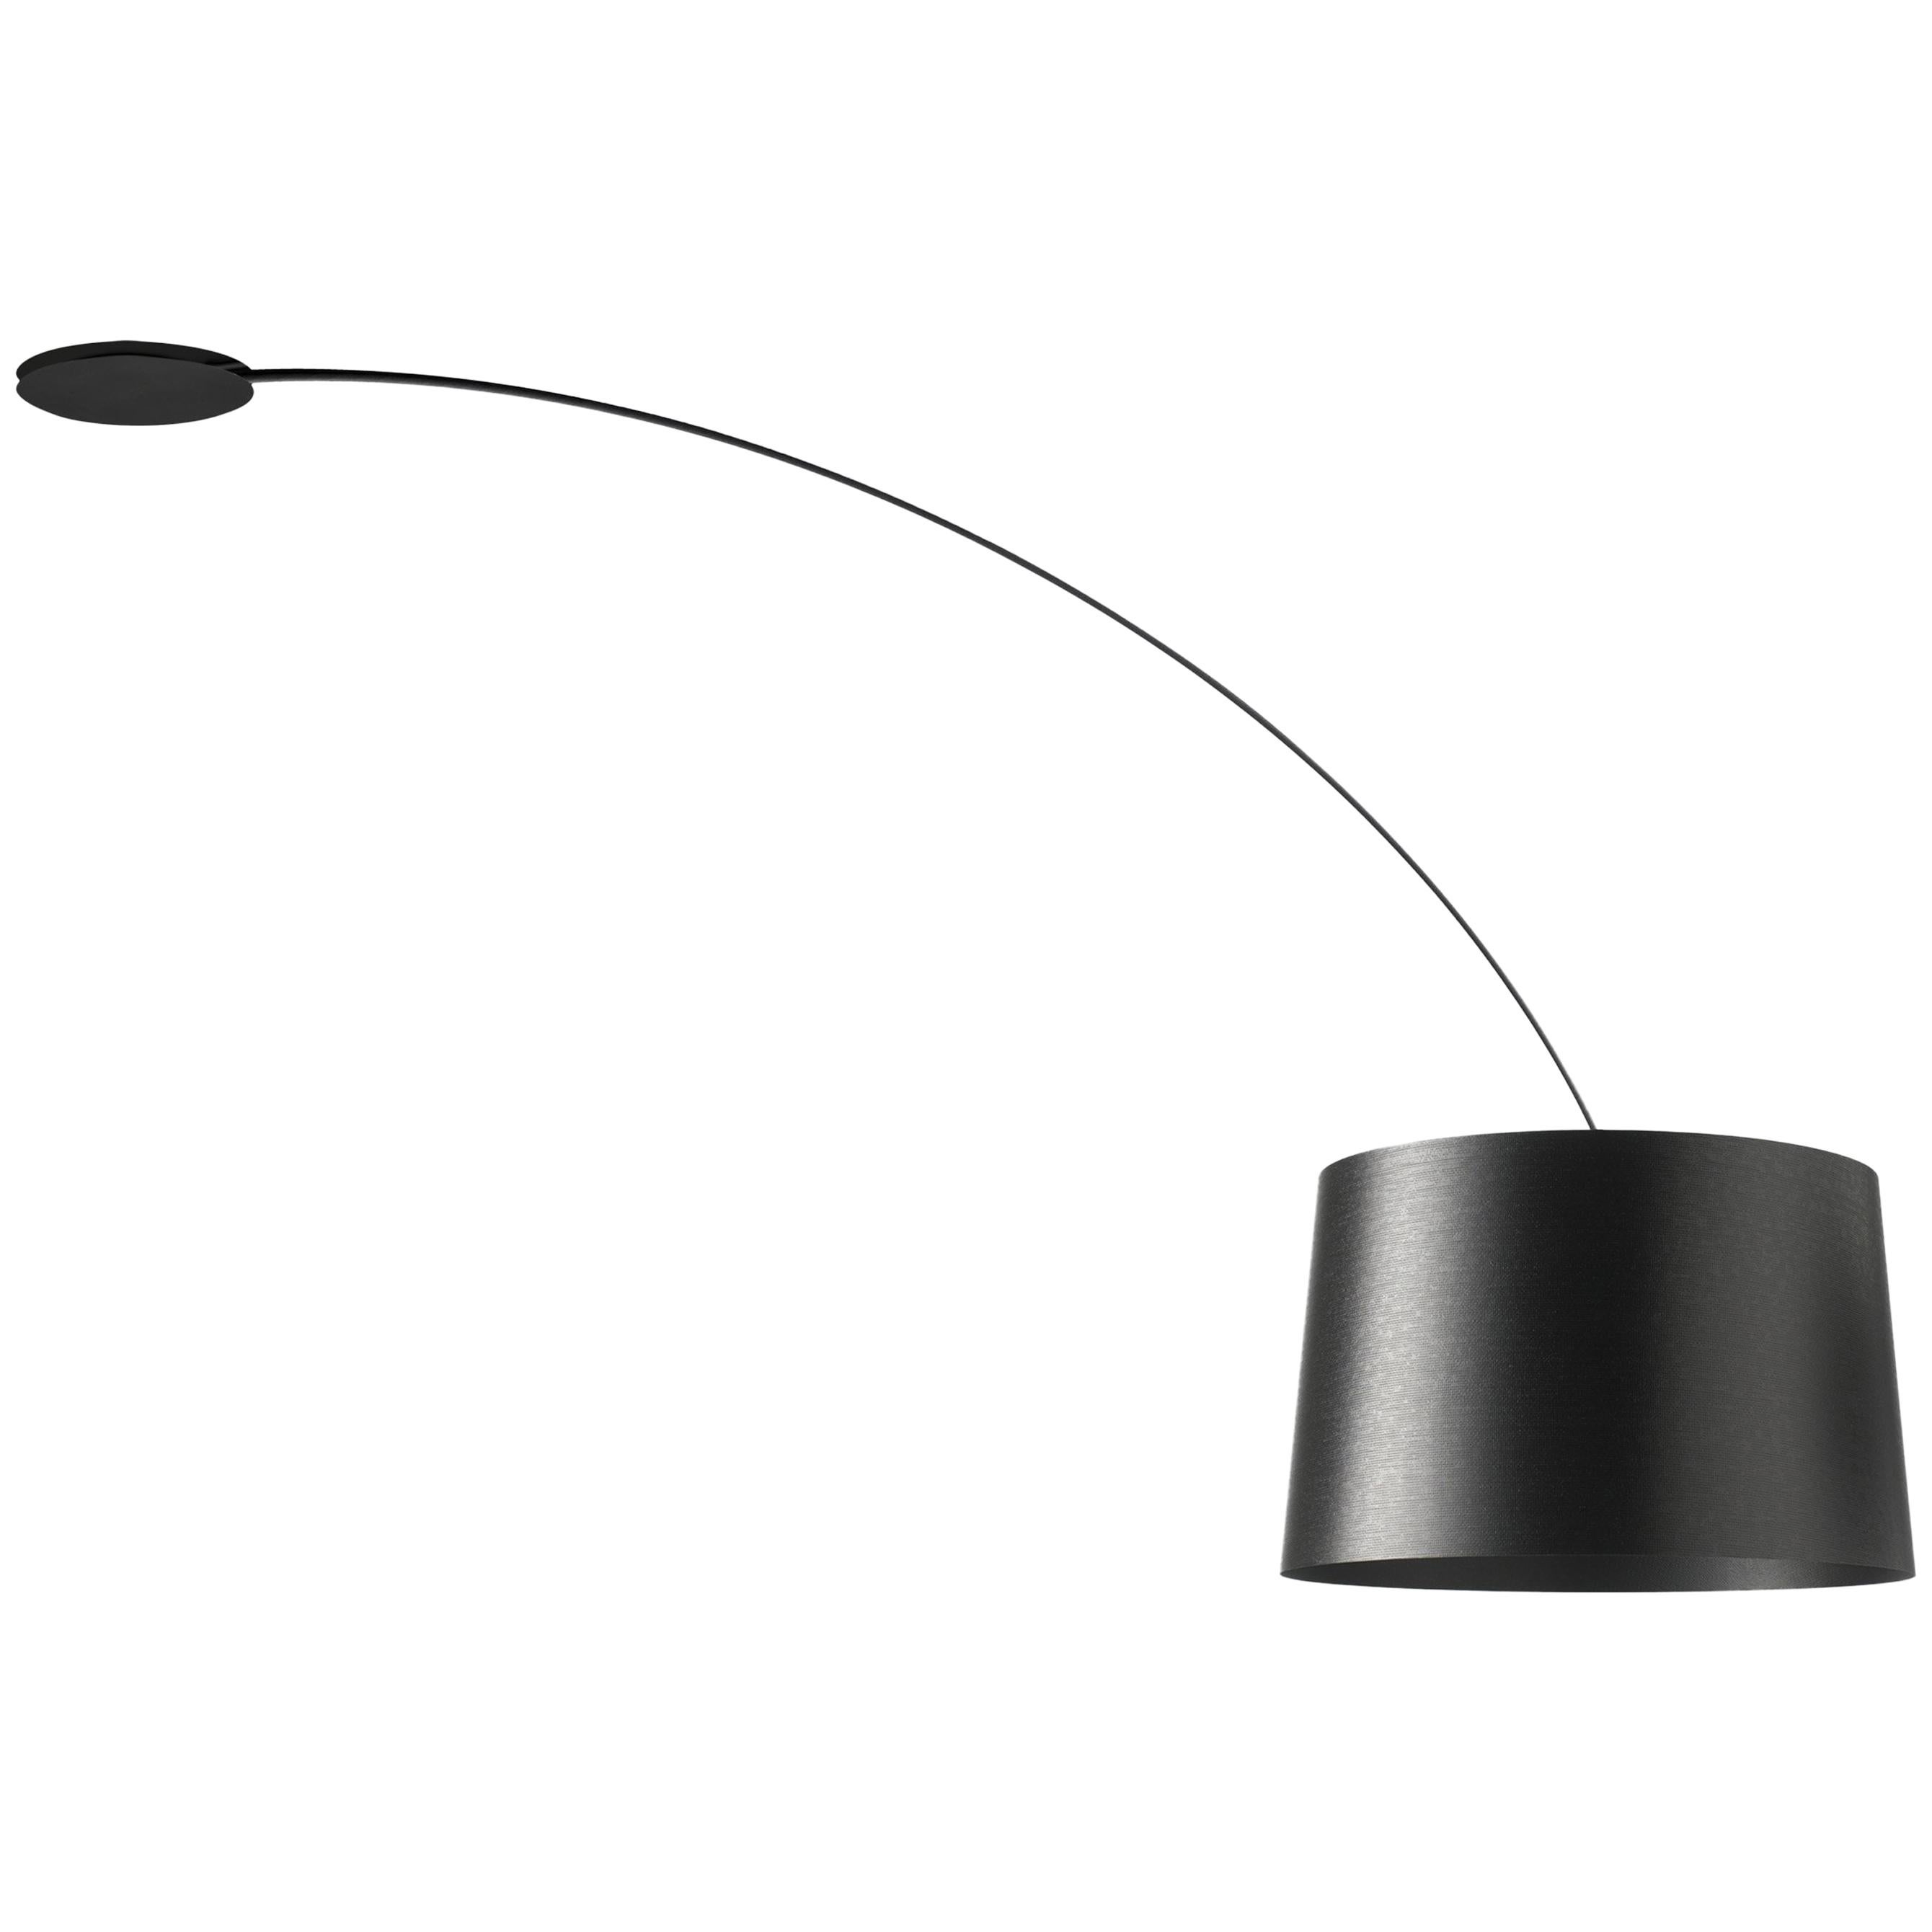 Ceiling lamp with arm, with direct and indirect light. Diffuser and rod made of fiberglass based composite material and liquid coated. Translucent polycarbonate upper di user disc, PMMA lower di user disc with polyprismatic internal surface. Epoxy